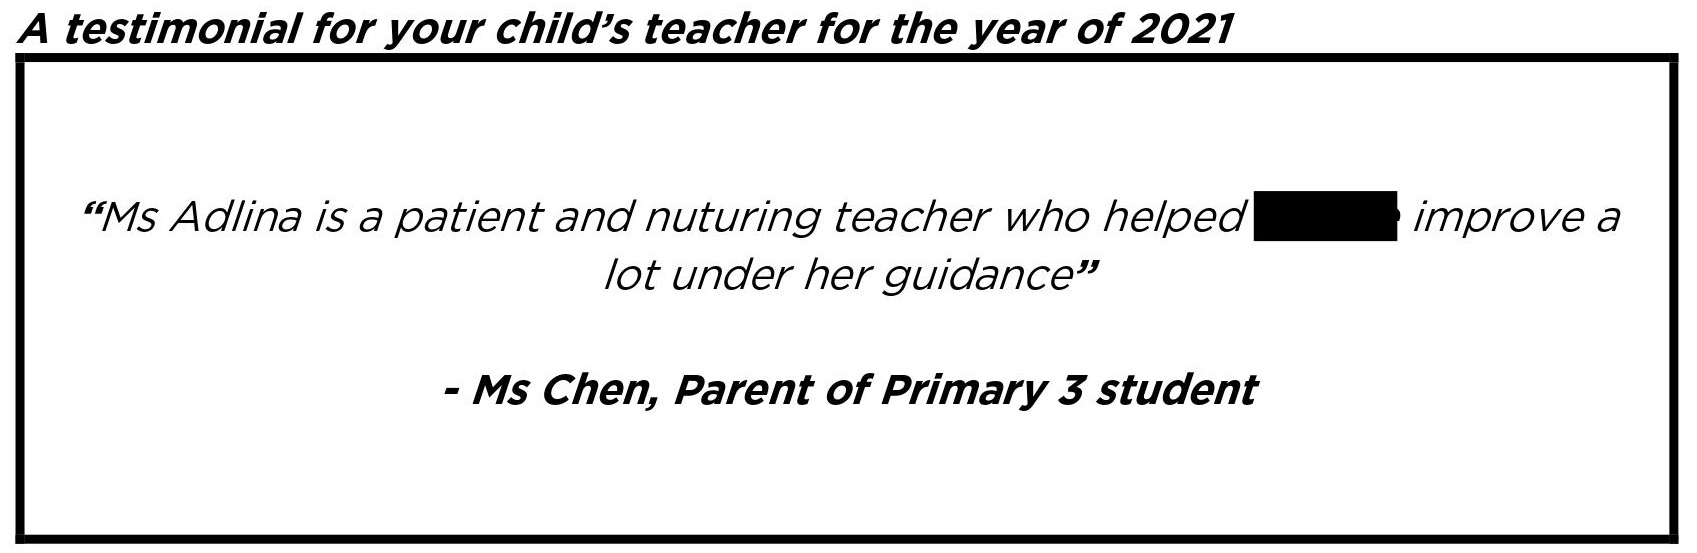 "…patient and nuturing teacher."